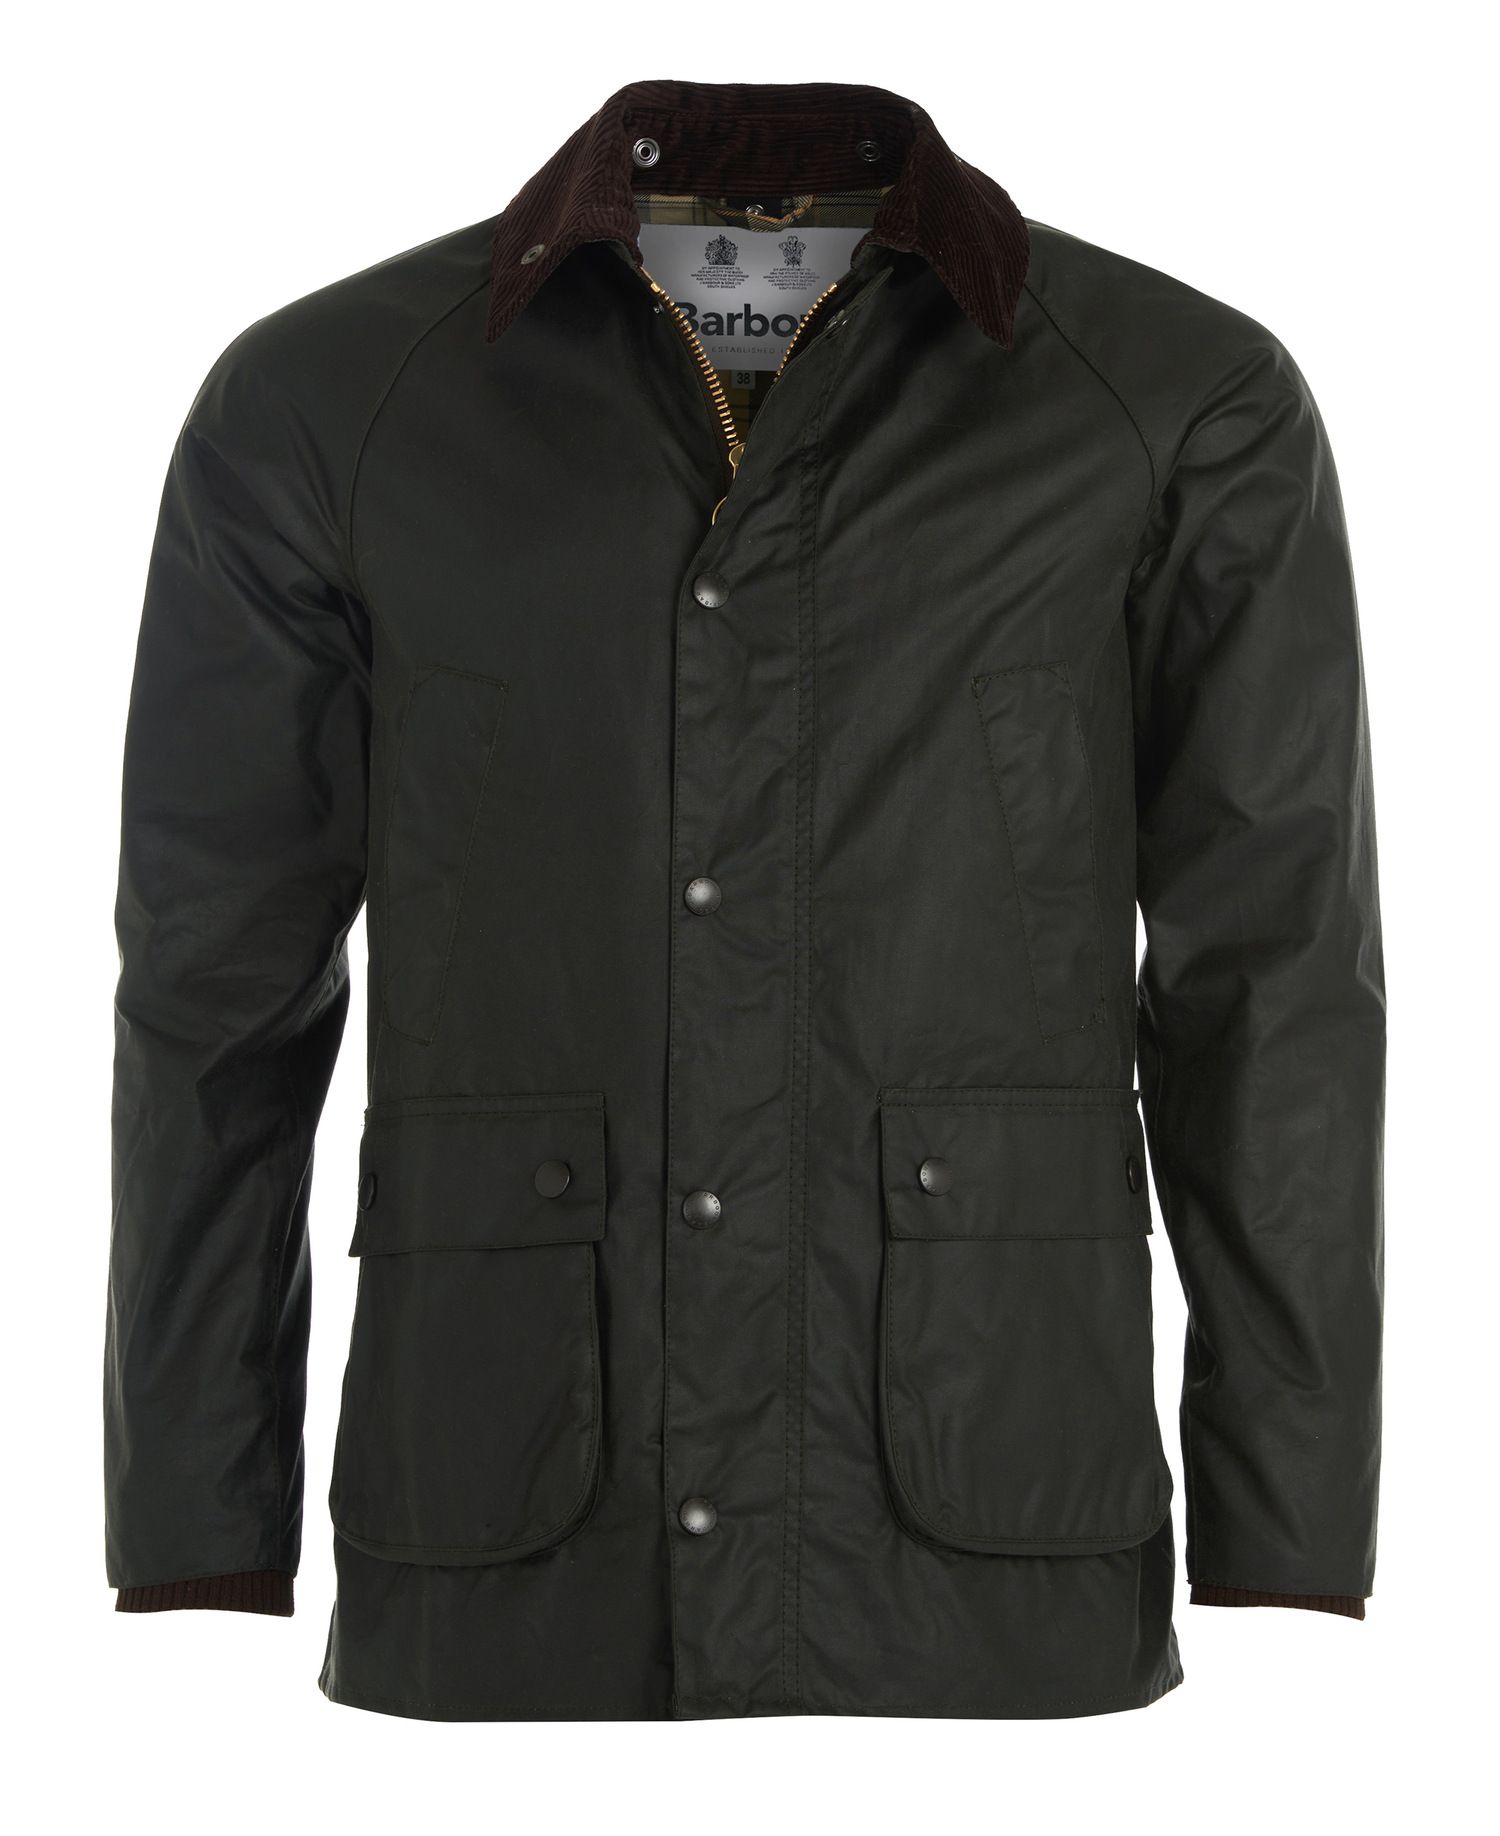 Barbour SL Bedale Waxed Cotton Jacket in Green | Barbour